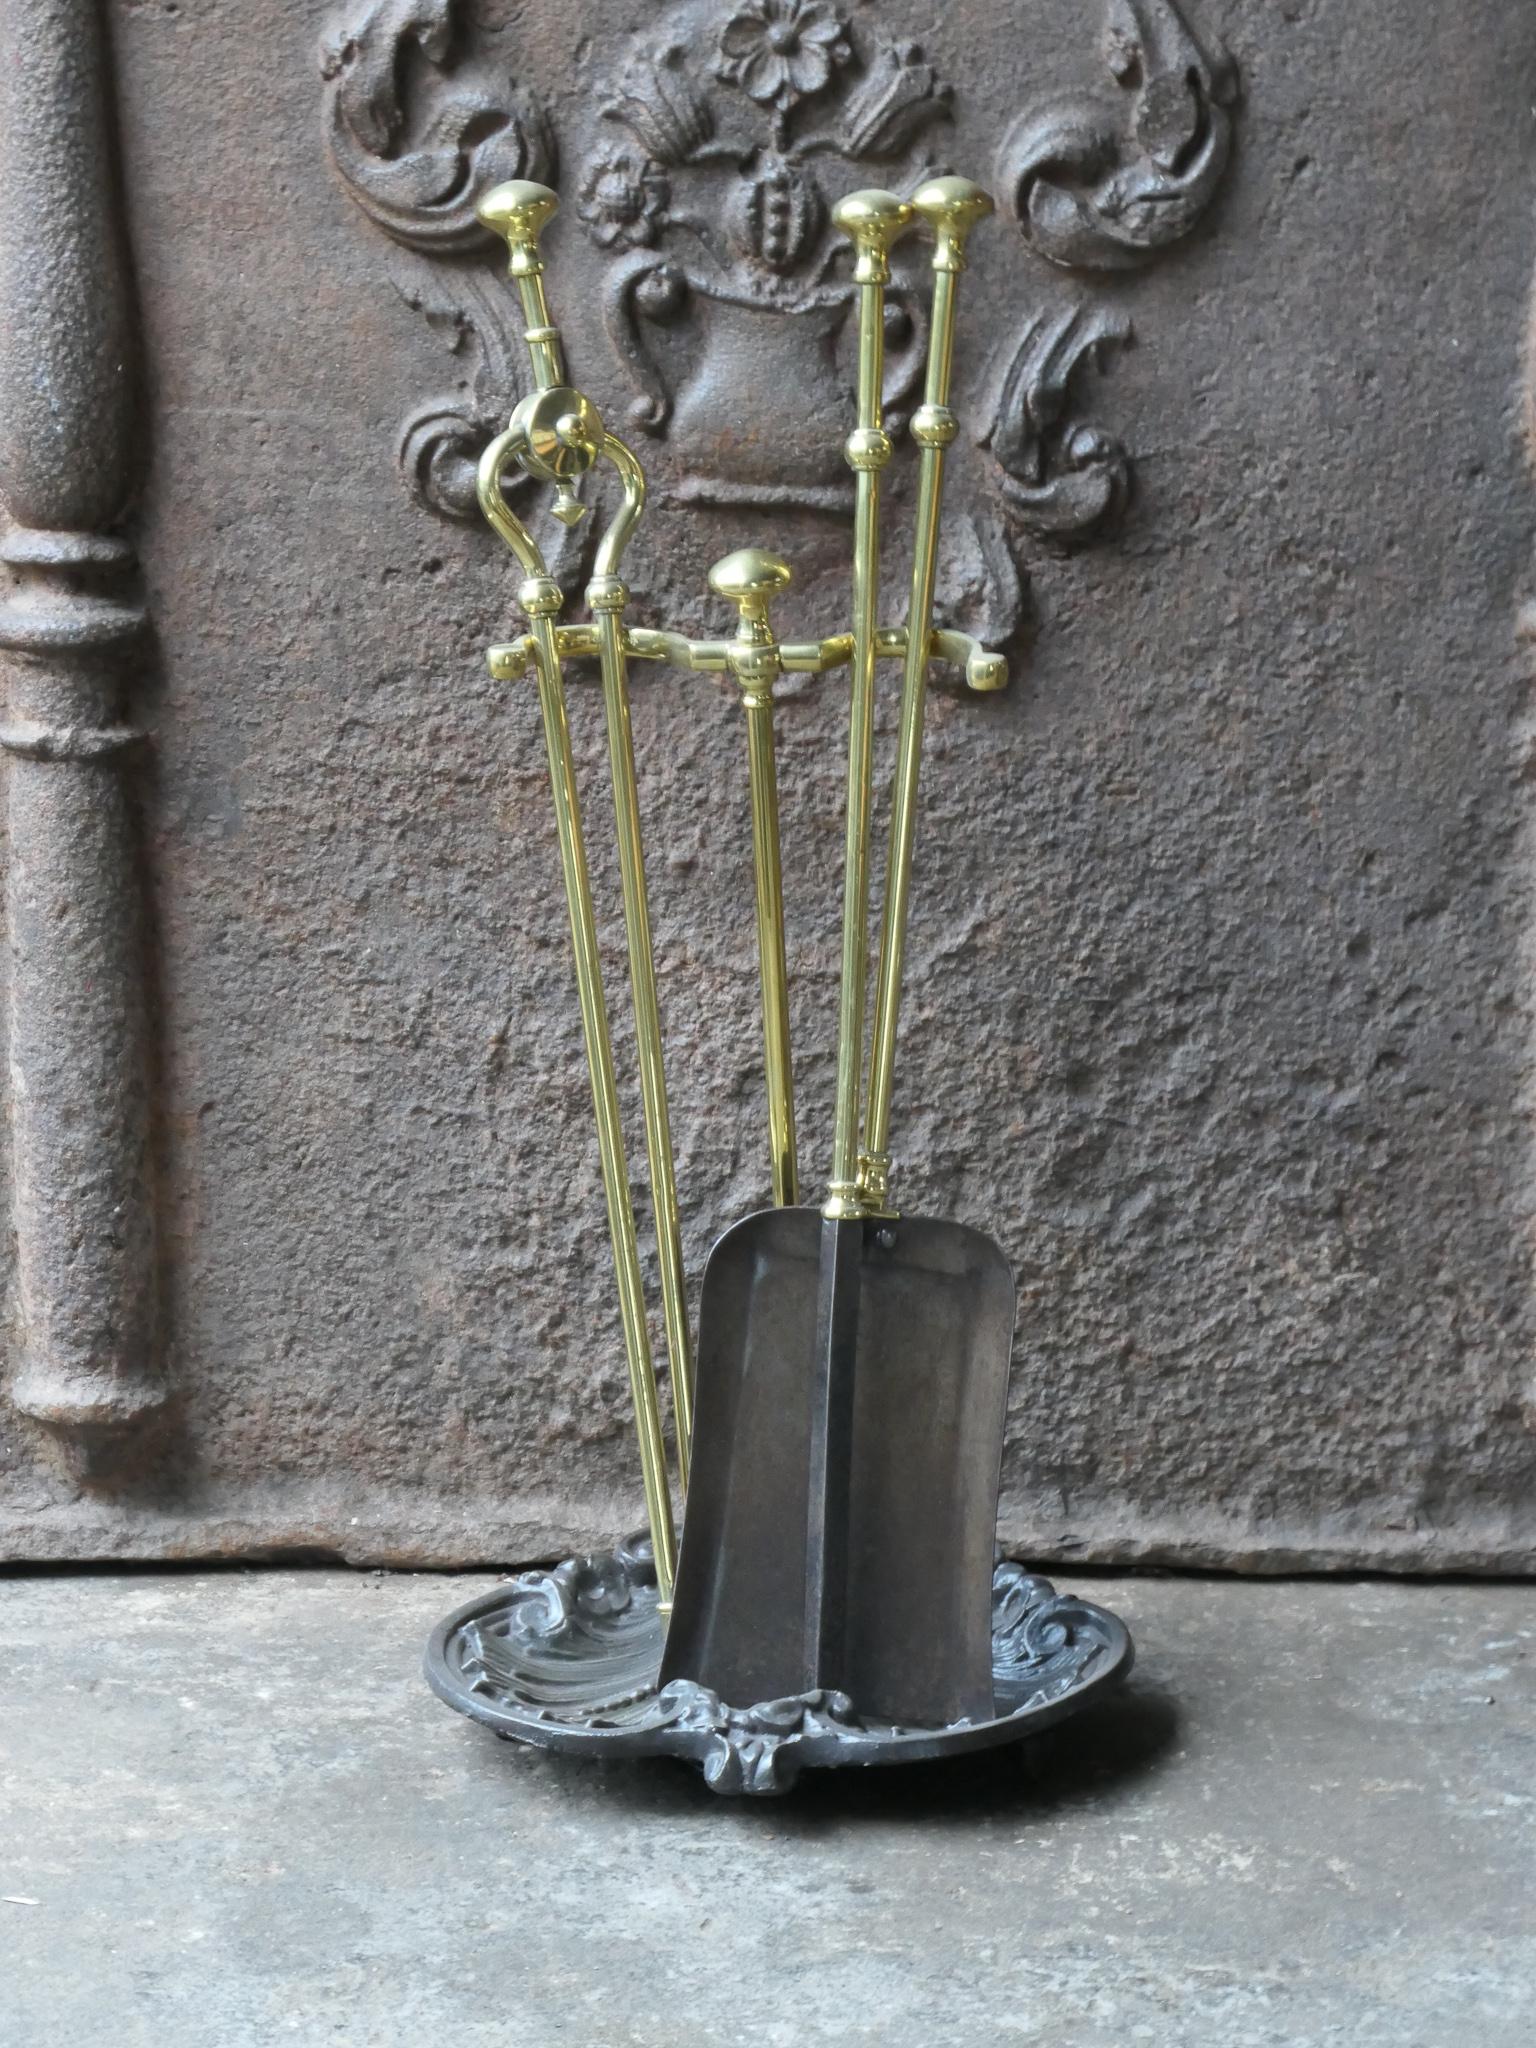 19th Century English Victorian fireplace tool set. The tool set consists of tongs, poker, shovel and stand. The set is made of brass and cast iron. The set is in a good condition and fit for use in the fireplace.